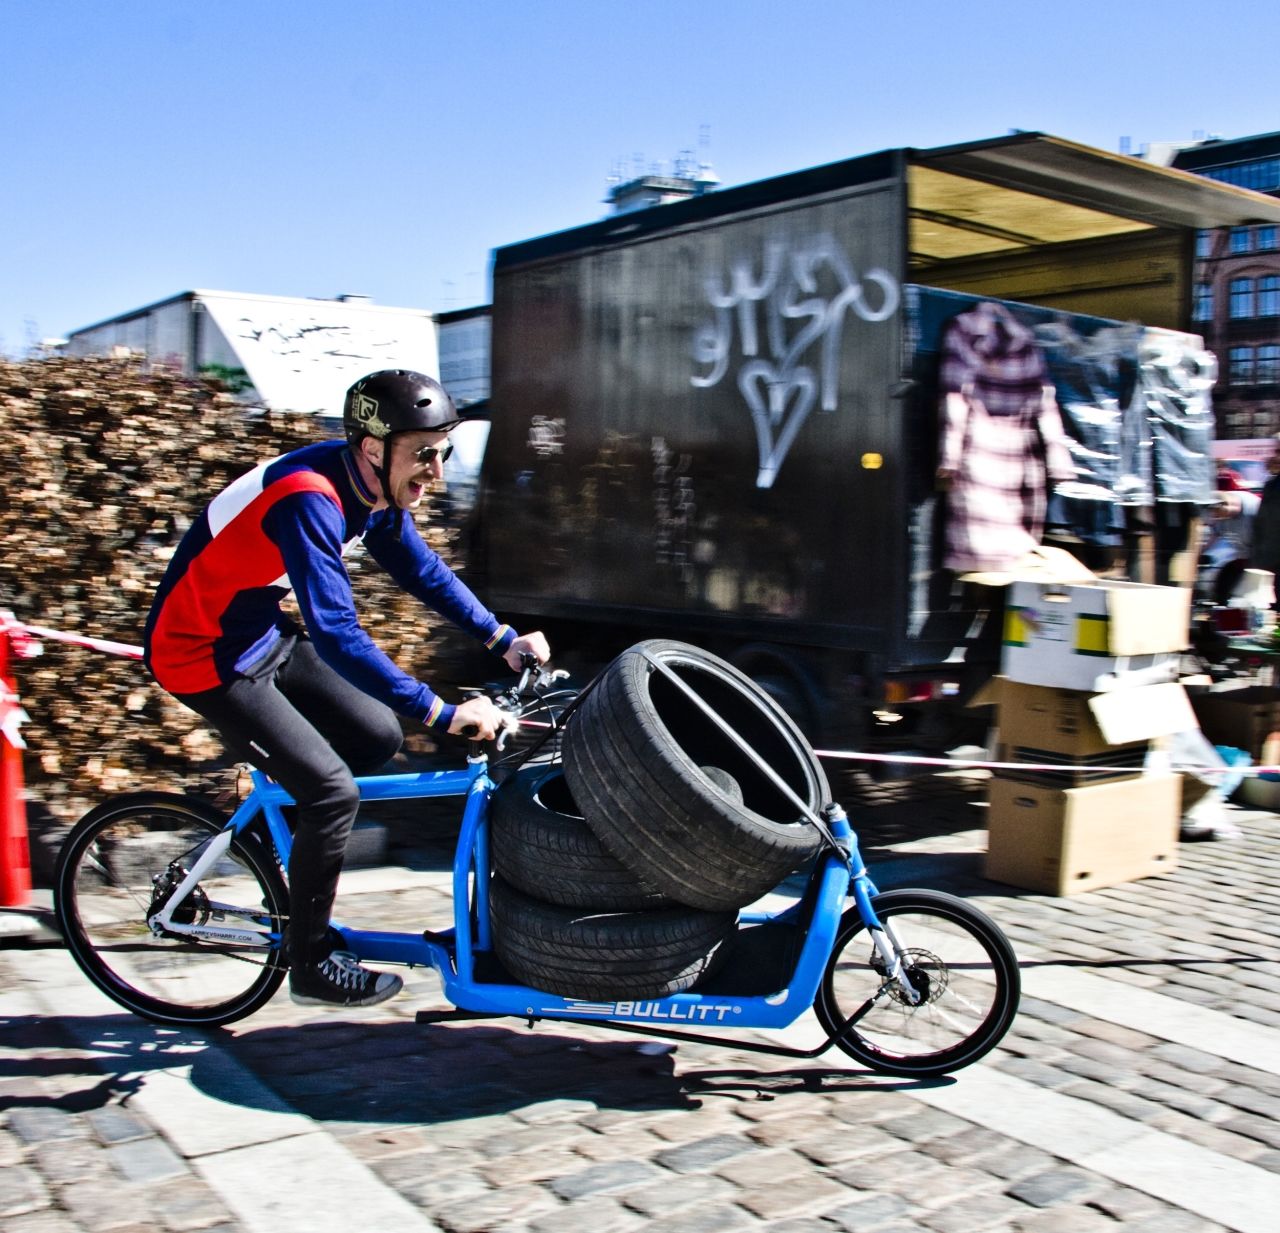 As cargo bikes become more prevalent in European cities, people are routinely relying less on cars to transport heavy and cumbersome items. 